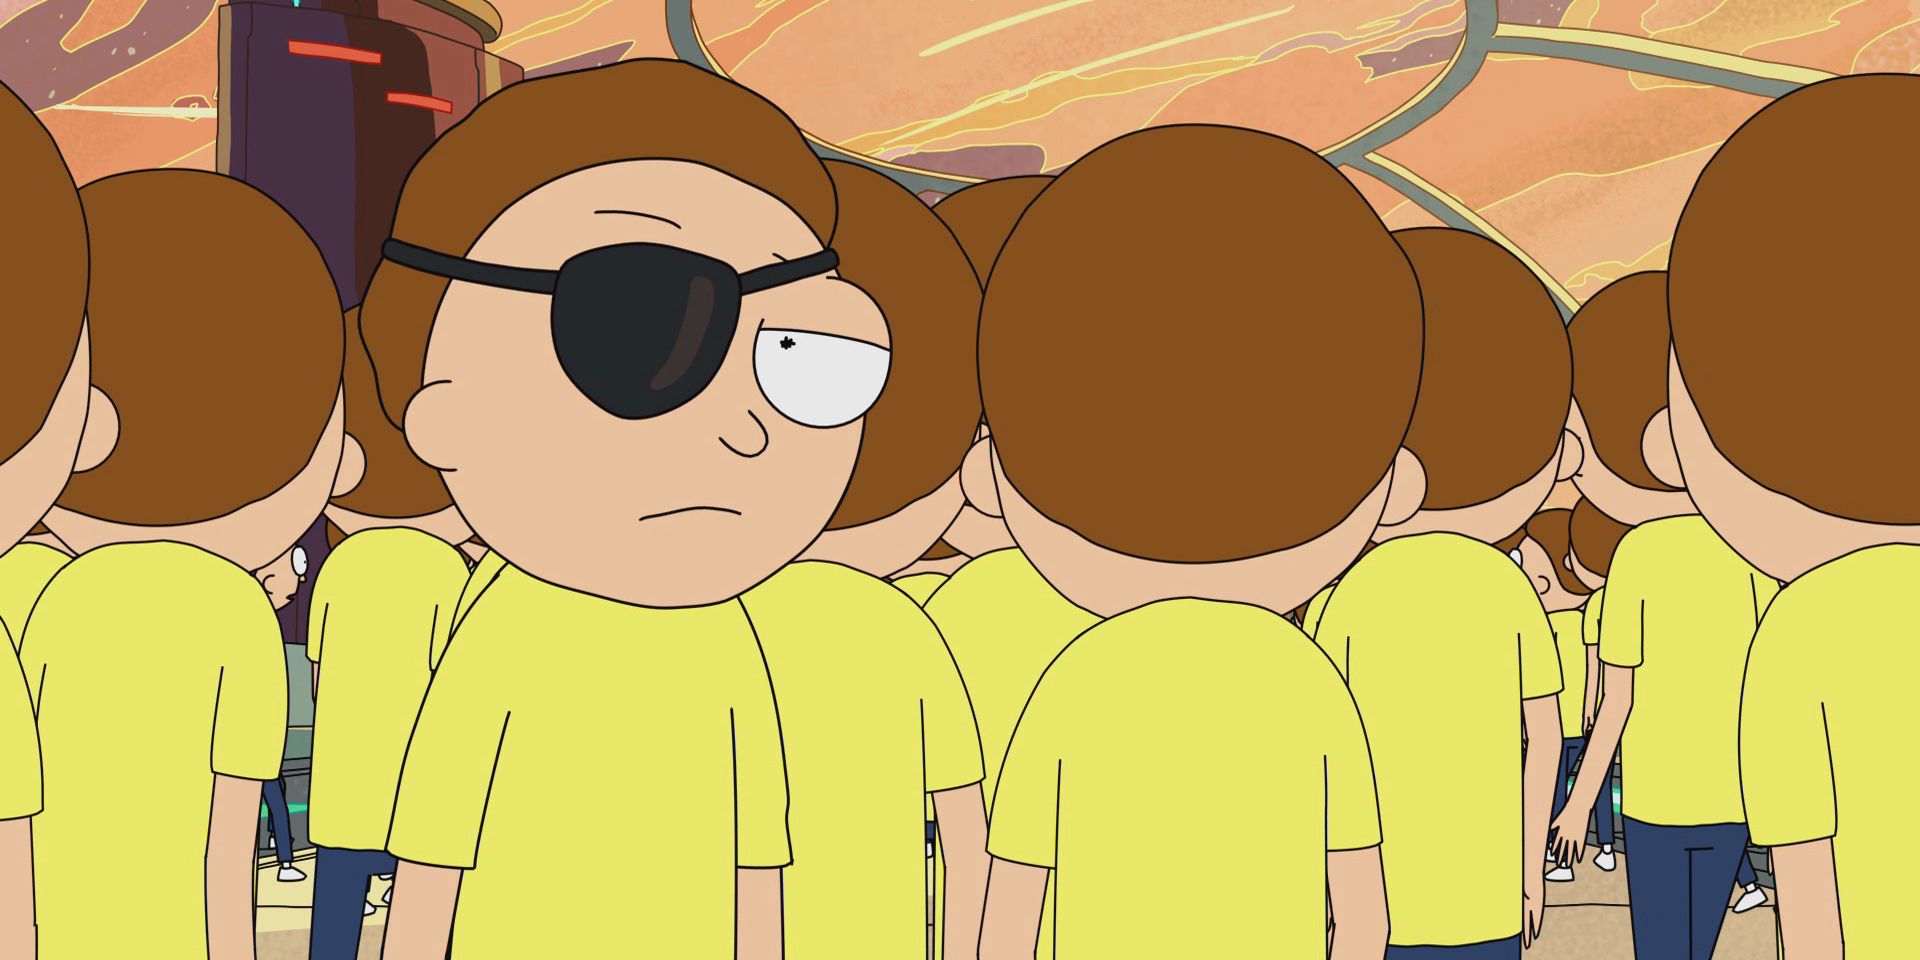 Emil Morty standin among other Mortys in Rick and Morty